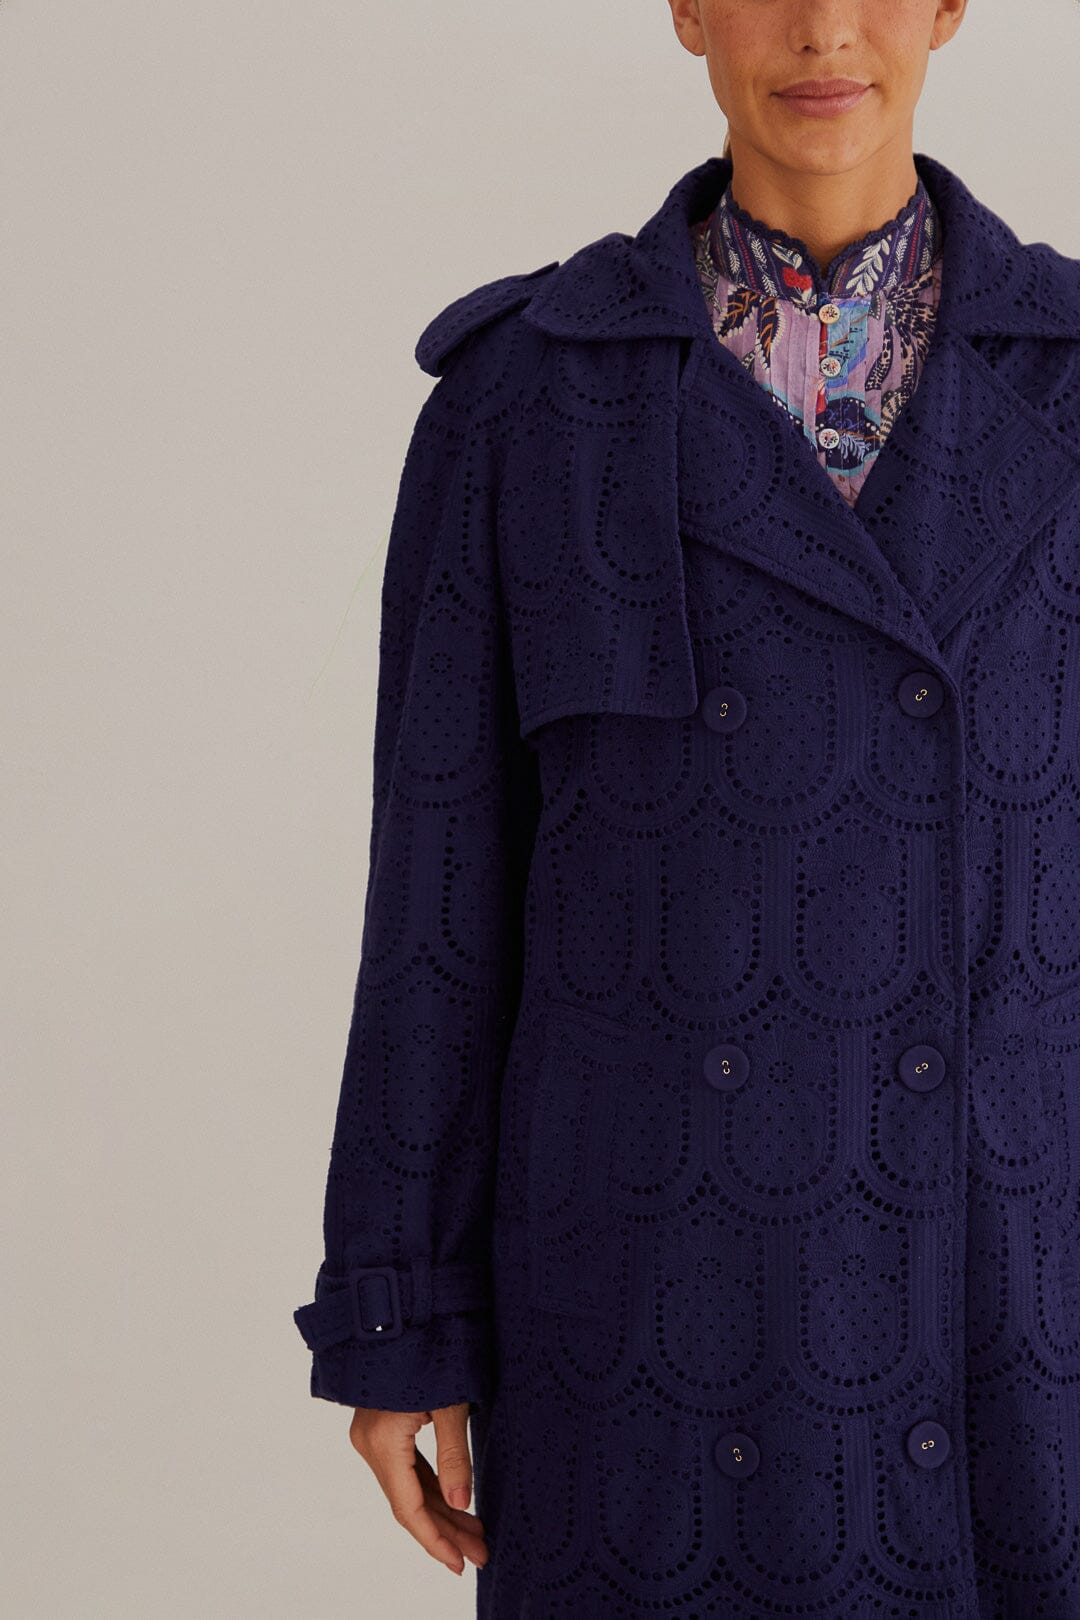 Navy Blue Pineapple Cotton Eyelet Trench Coat